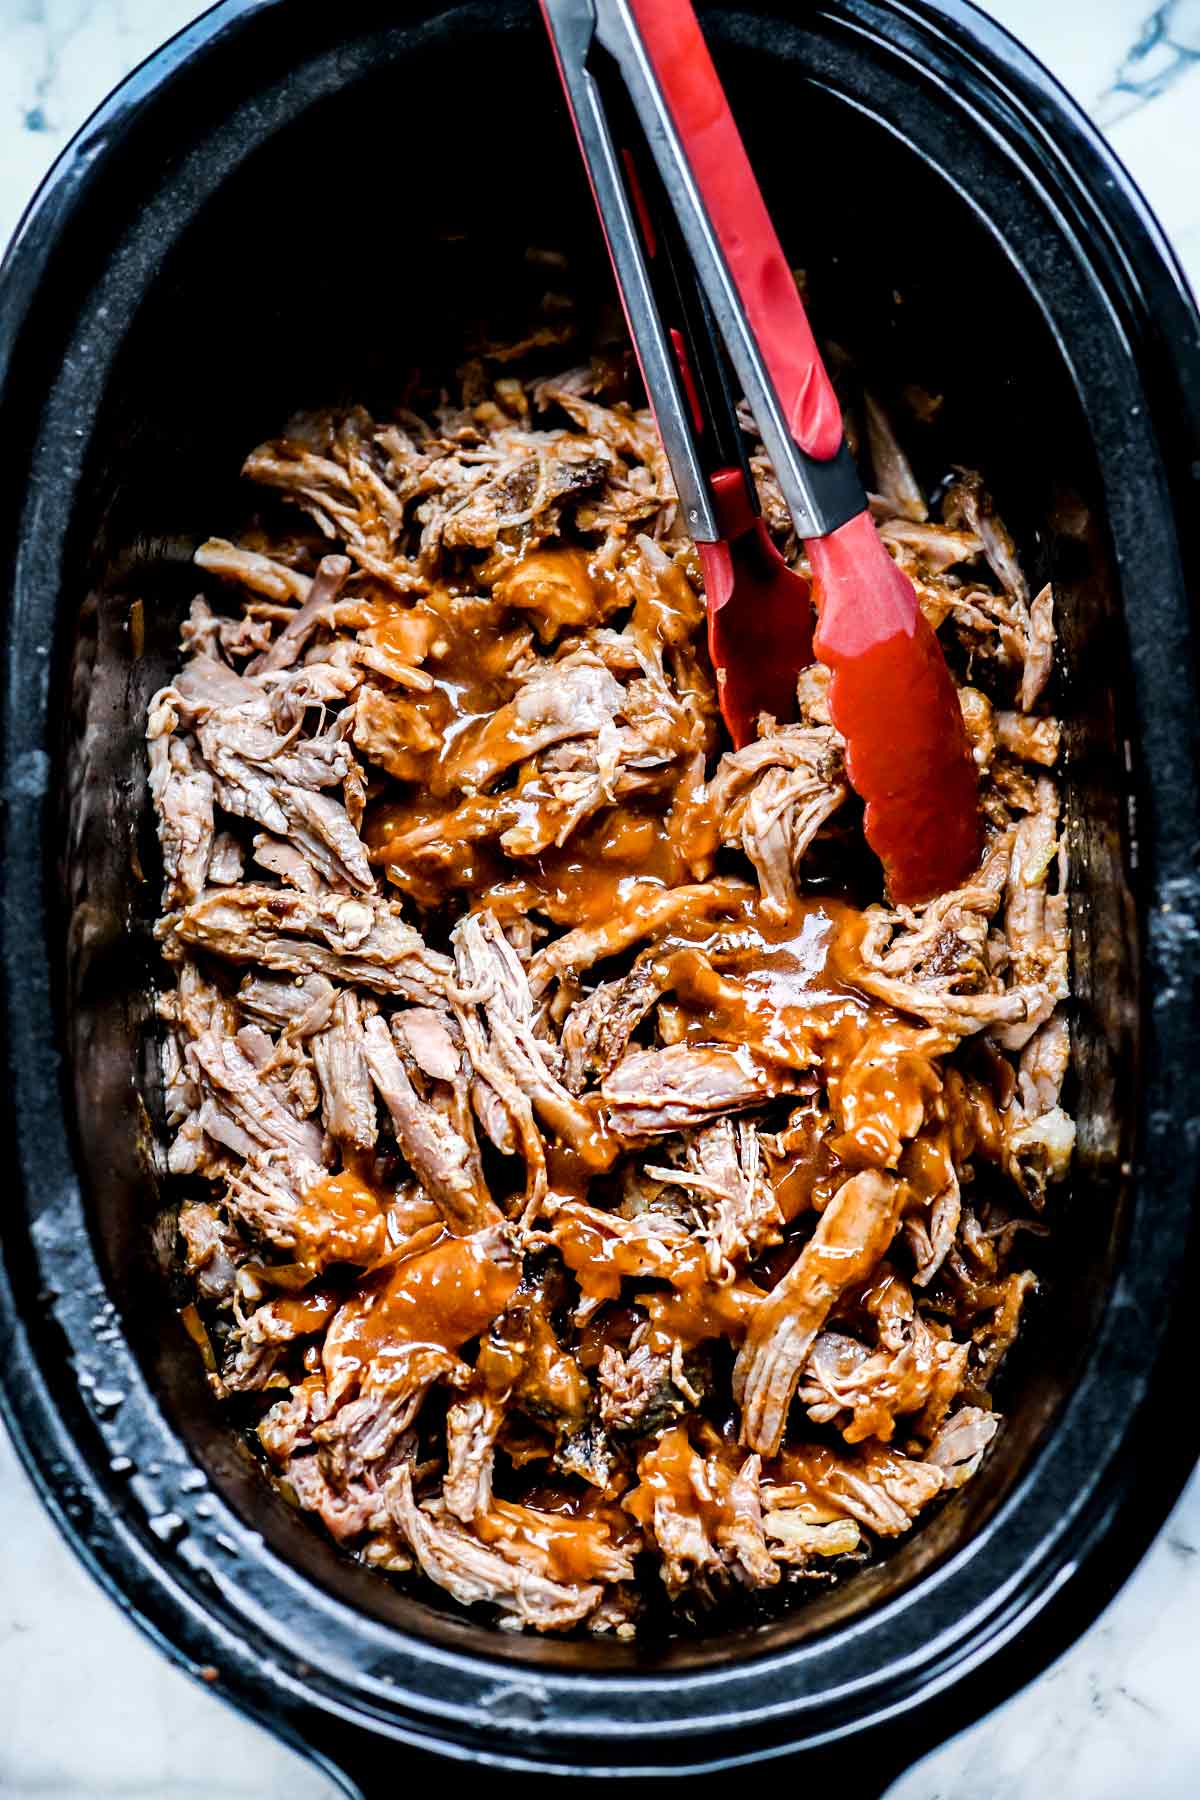 Best Slow-Cooker Pulled Pork - How to Make Pulled Pork in the Slow